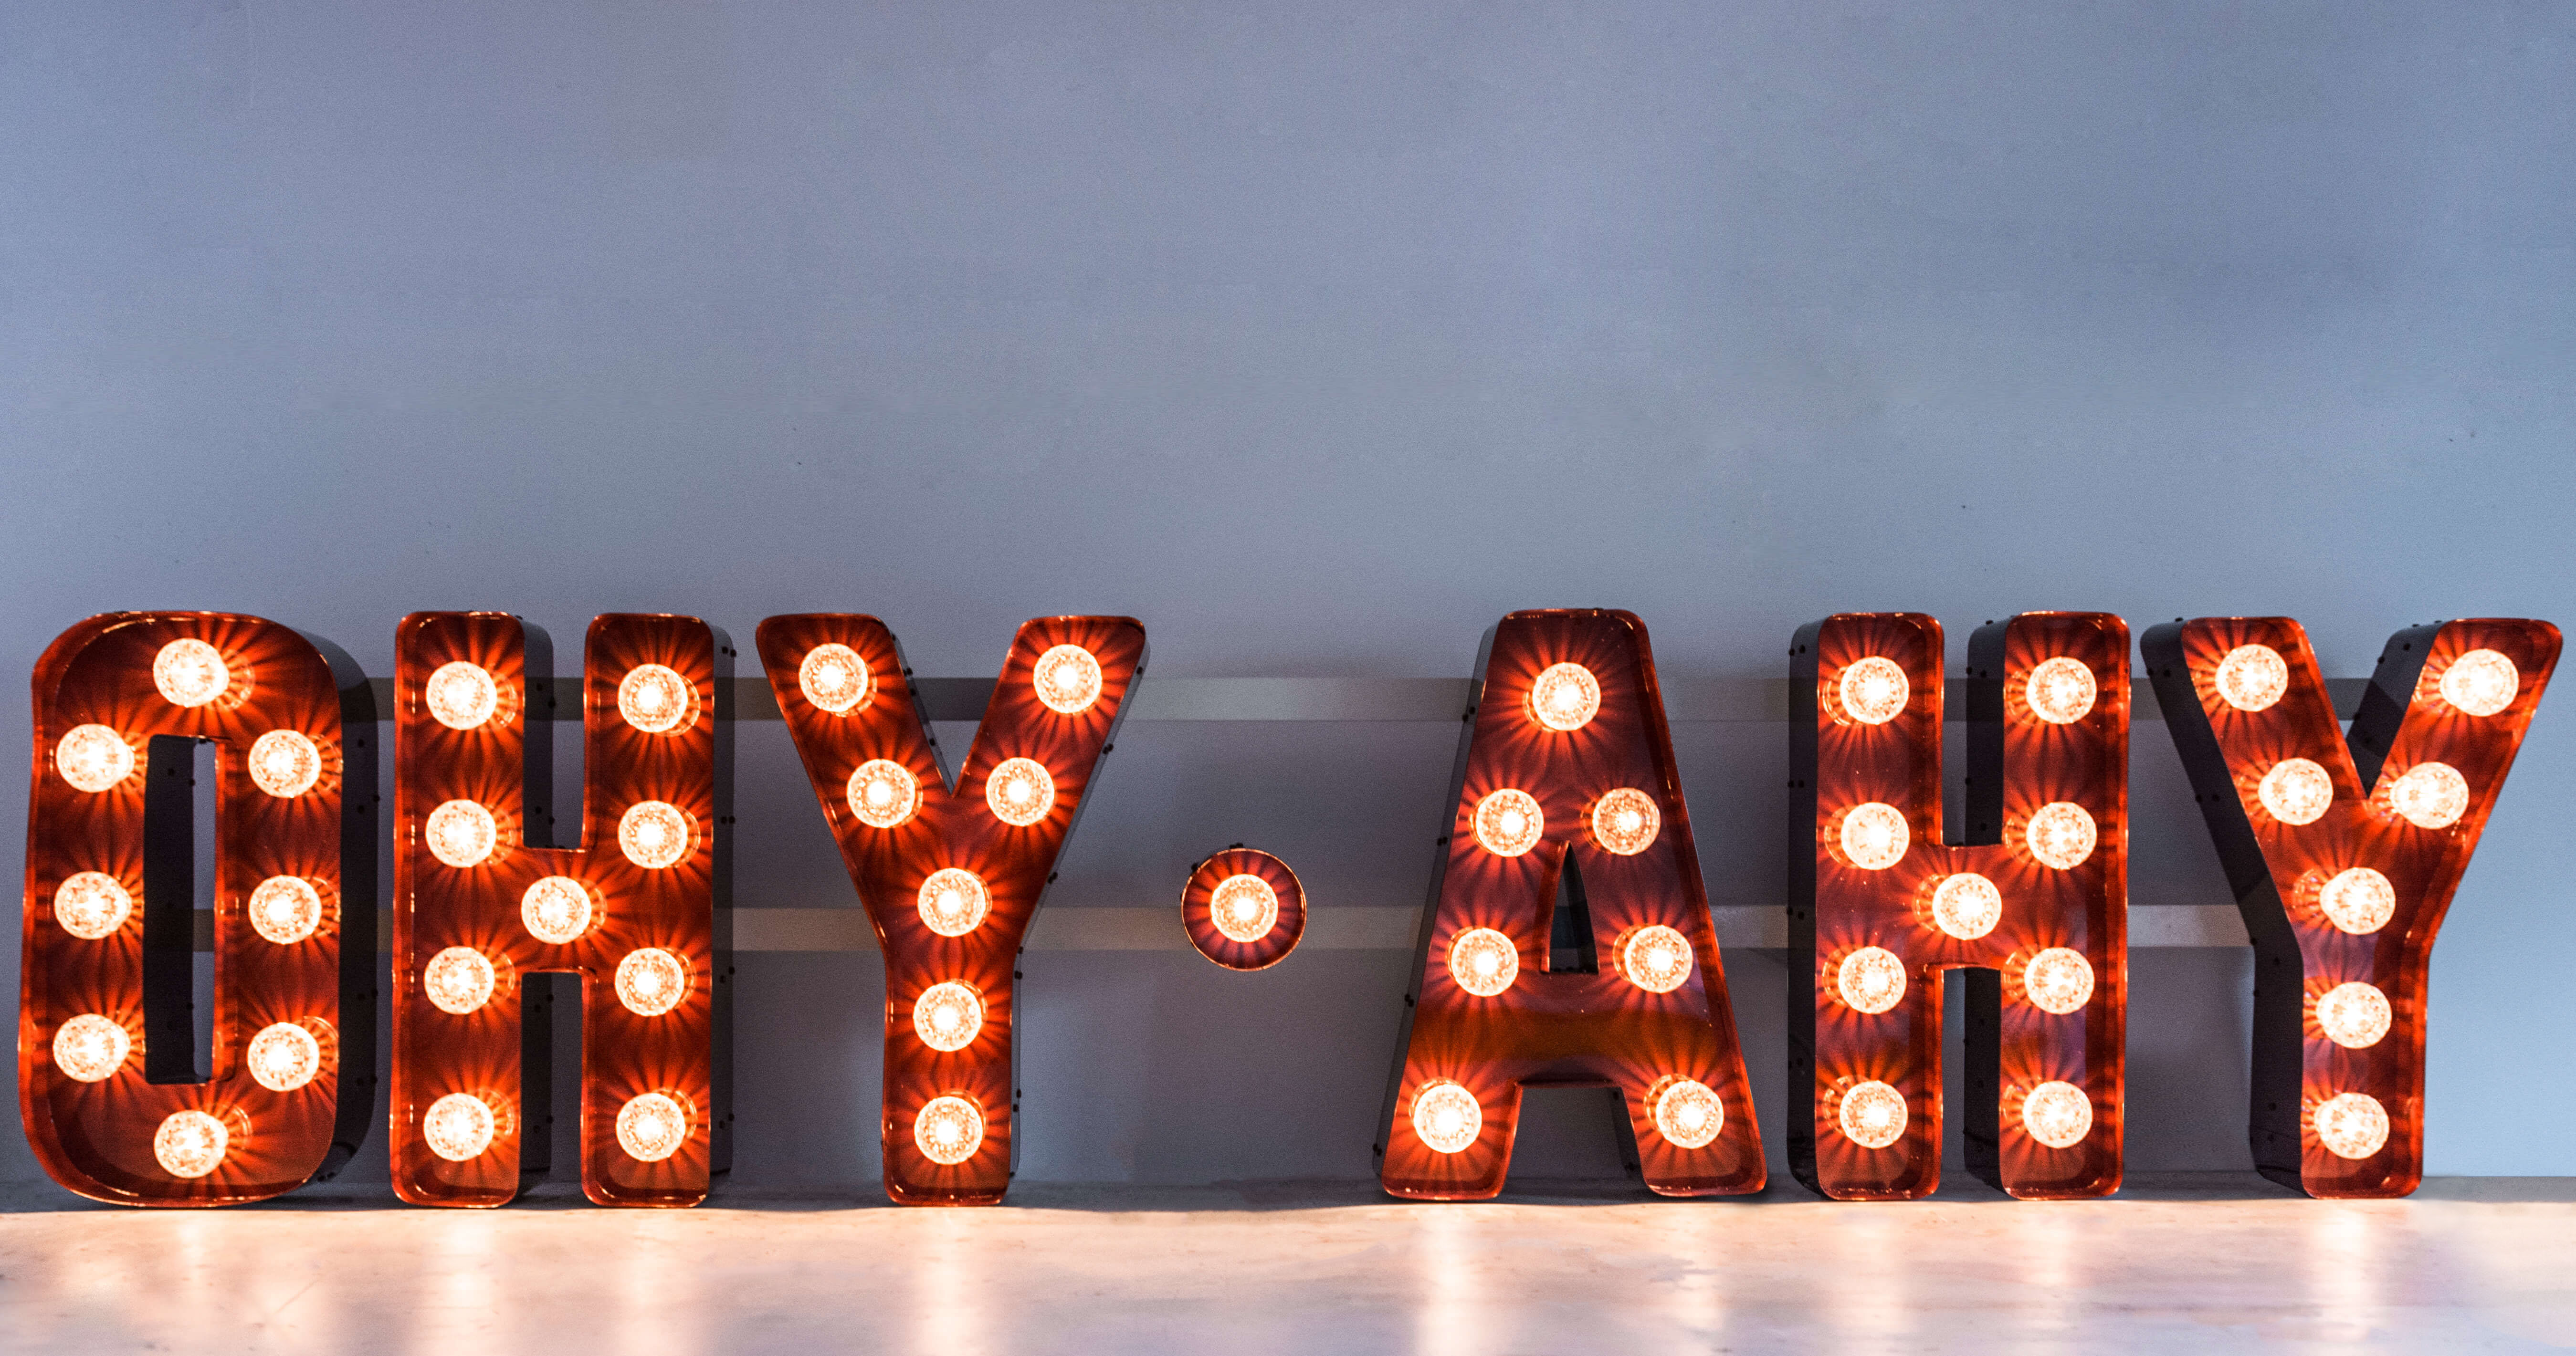 retro - Letters with light bulbs in retro style